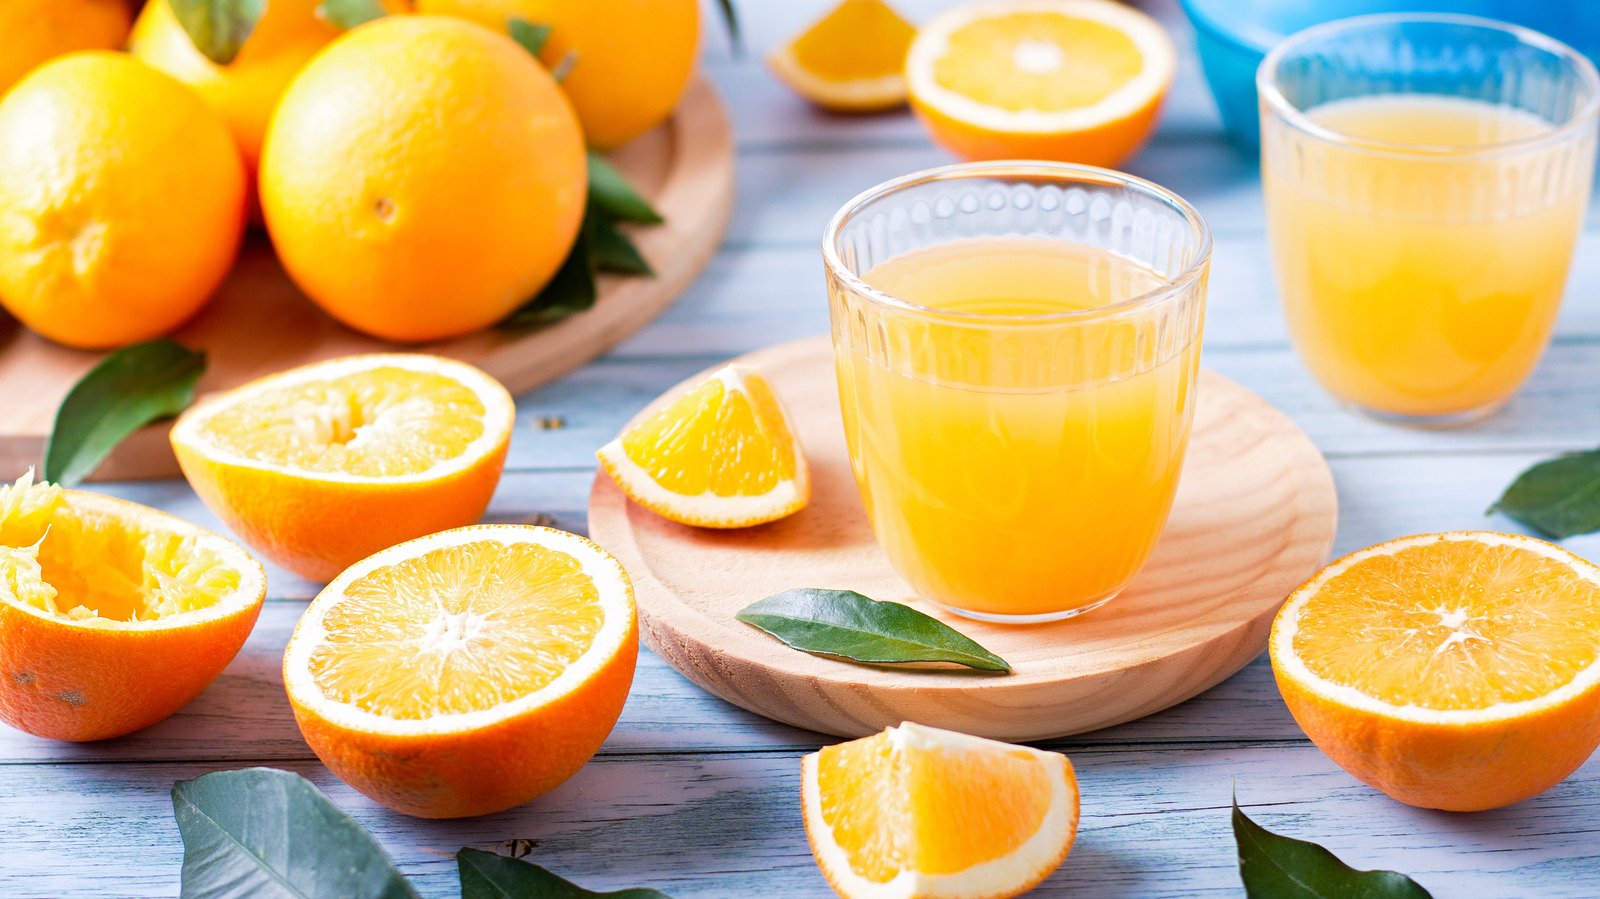 The Price Of Orange Juice May Be About To Skyrocket. Here's Why